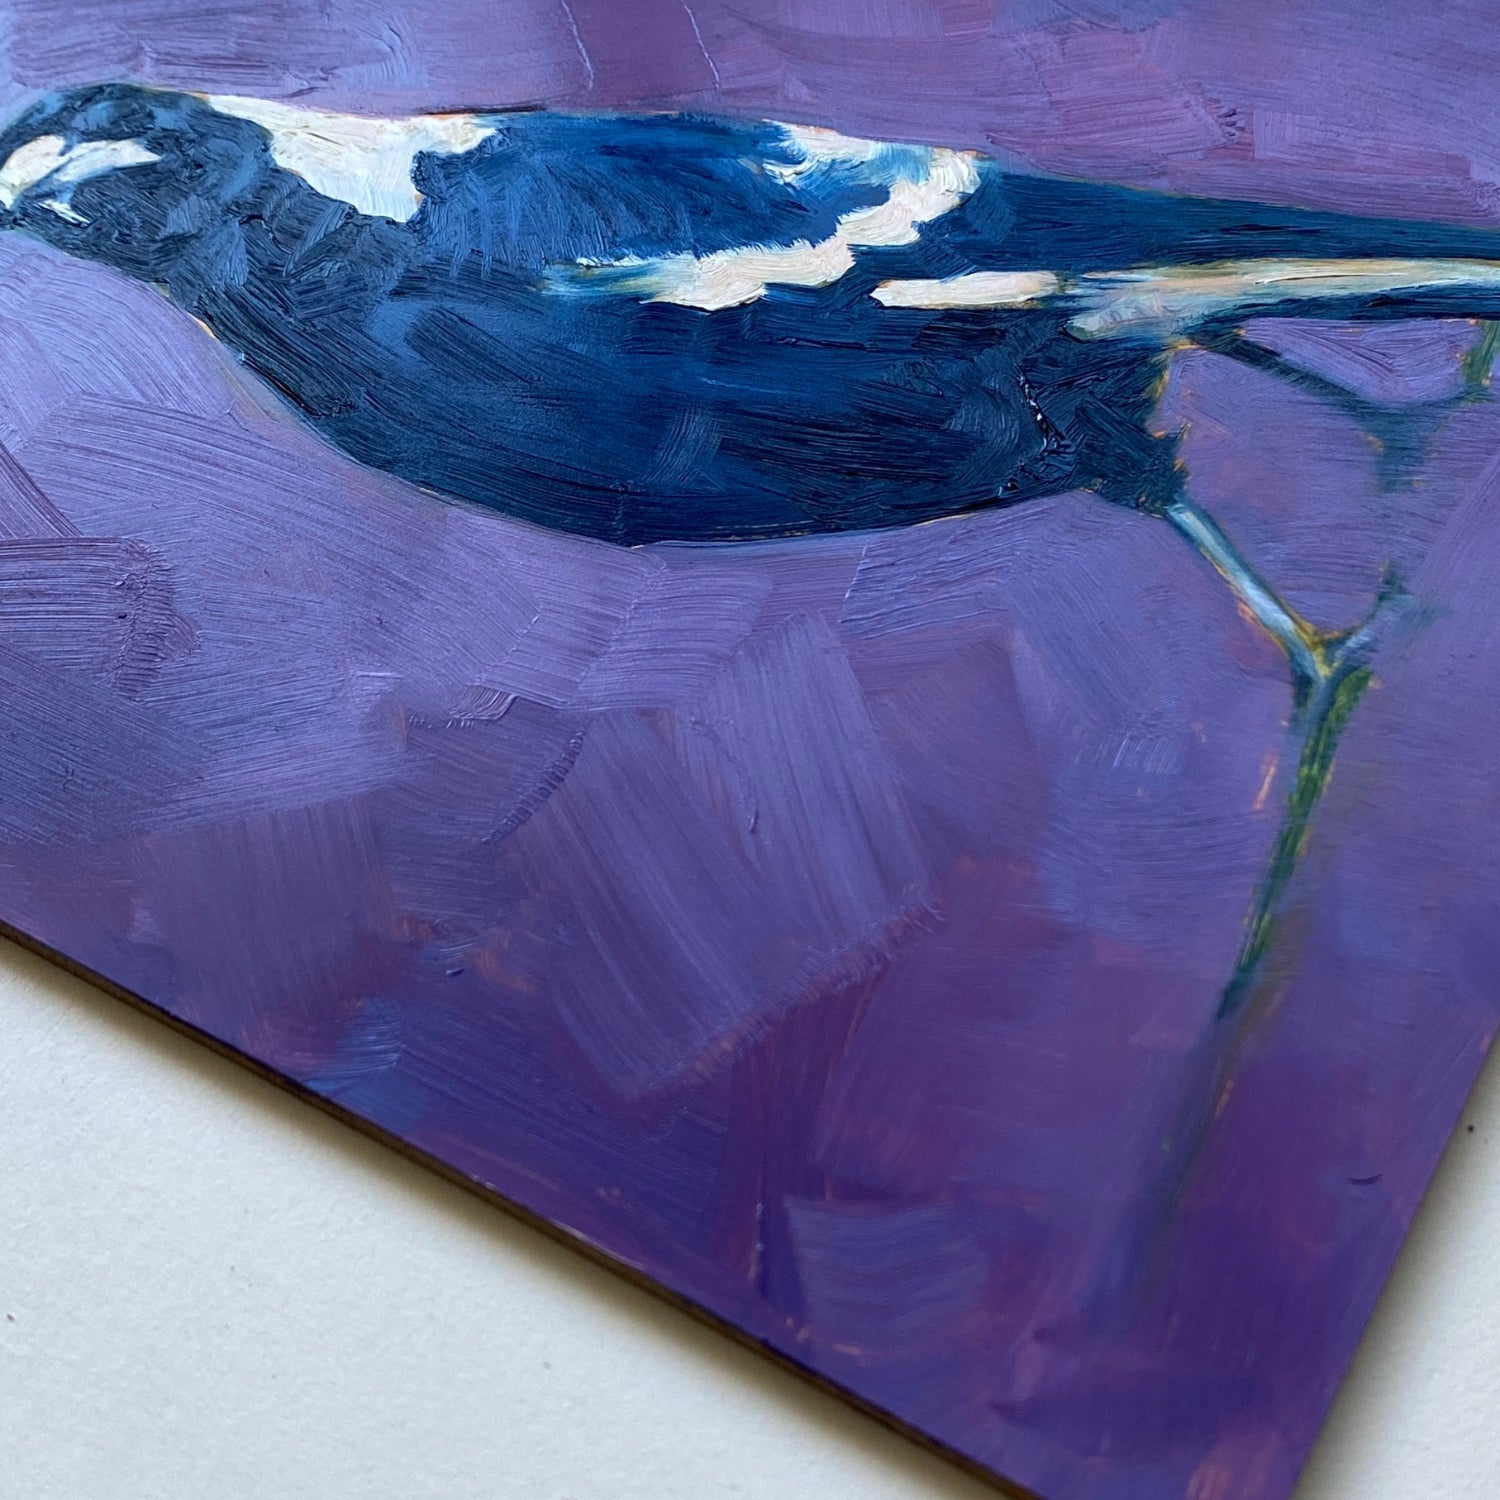 closeup of an original oil painting of a navy blue and white magpie with its head tilted on a bright and textured purple with bits of blue background. The painting is sitting on a white surface.